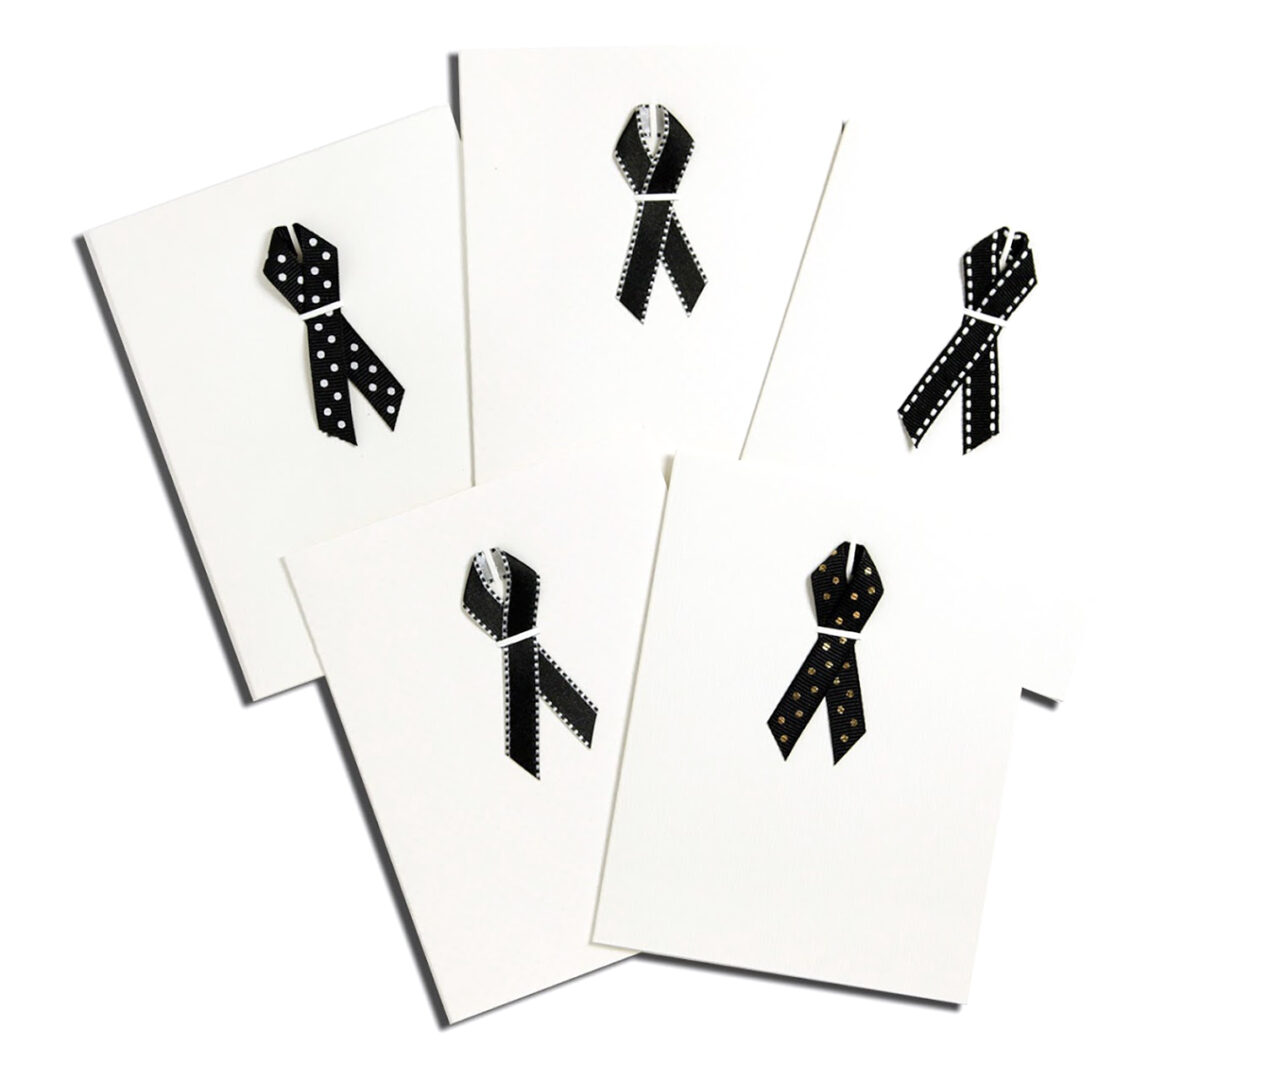 A set of five cards with black and white ribbon designs.